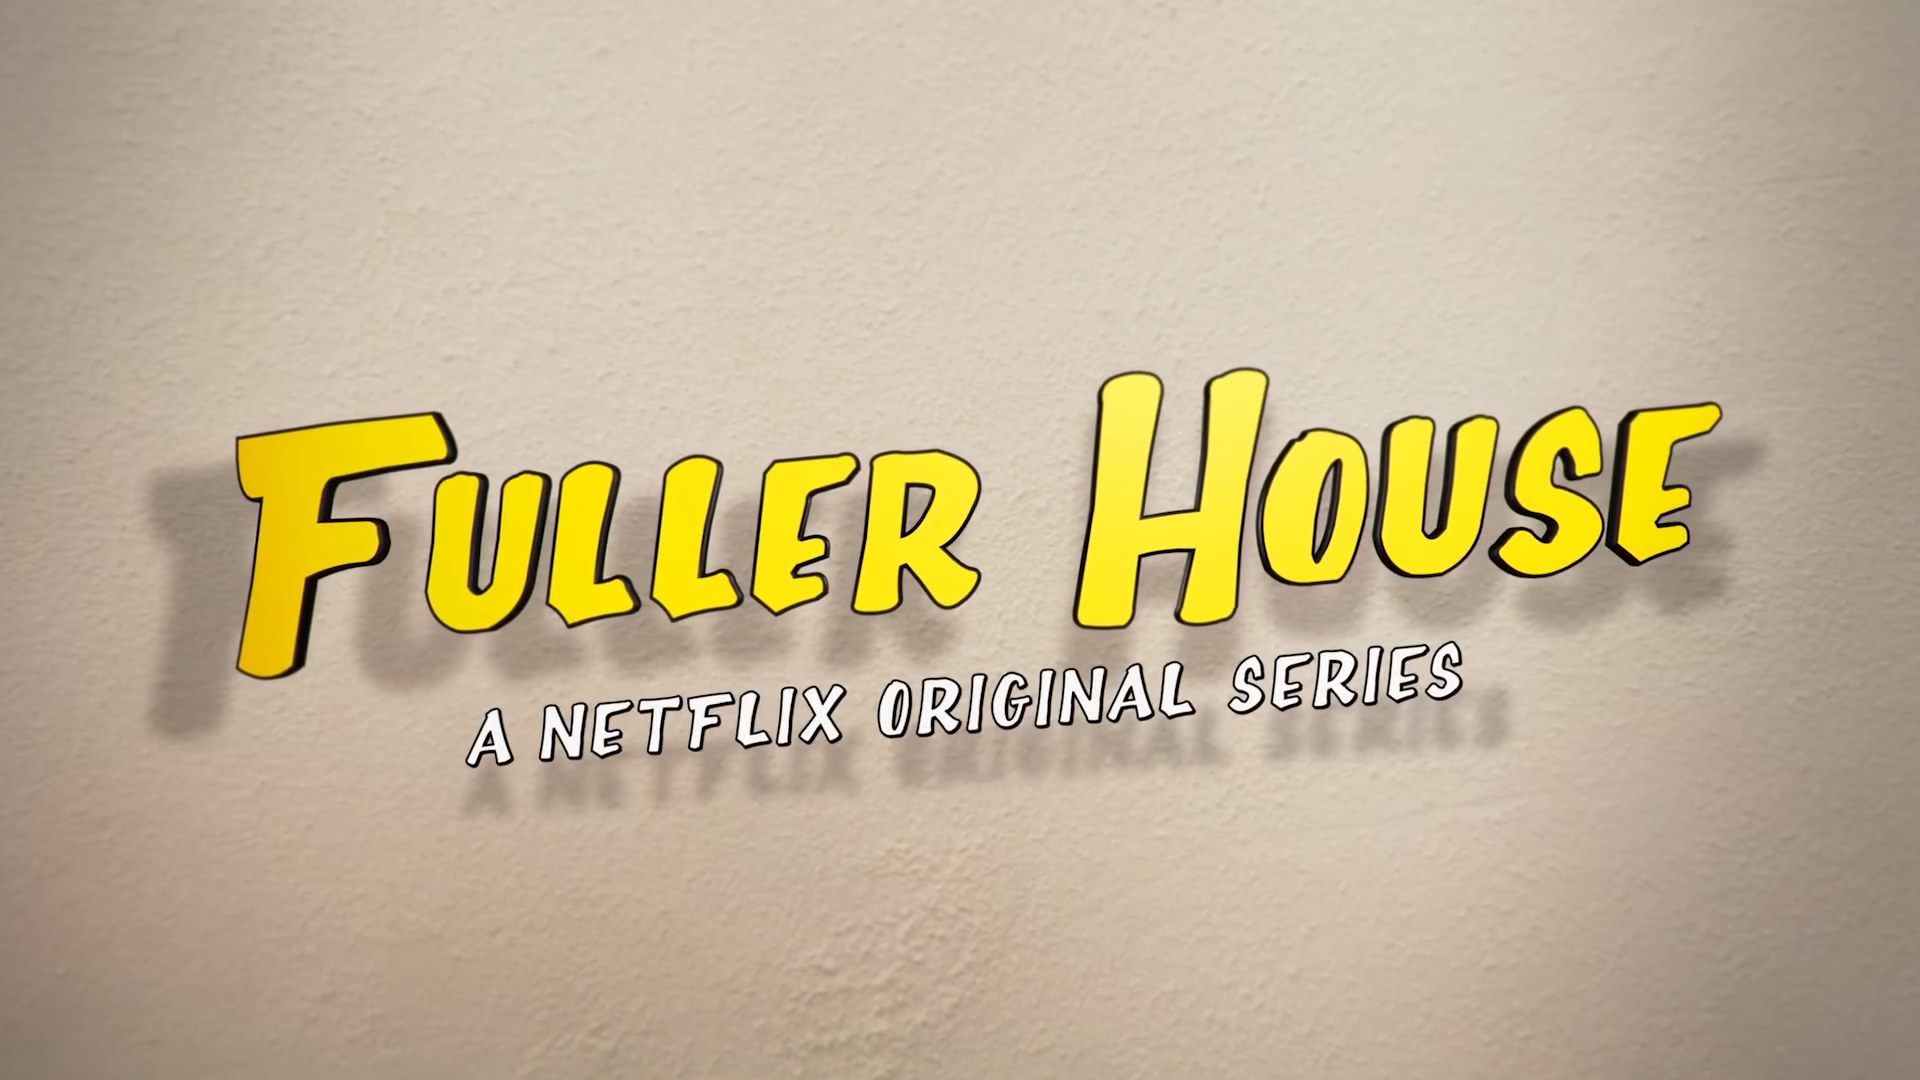 Title screen for Fuller House shown in yellow text with white text under